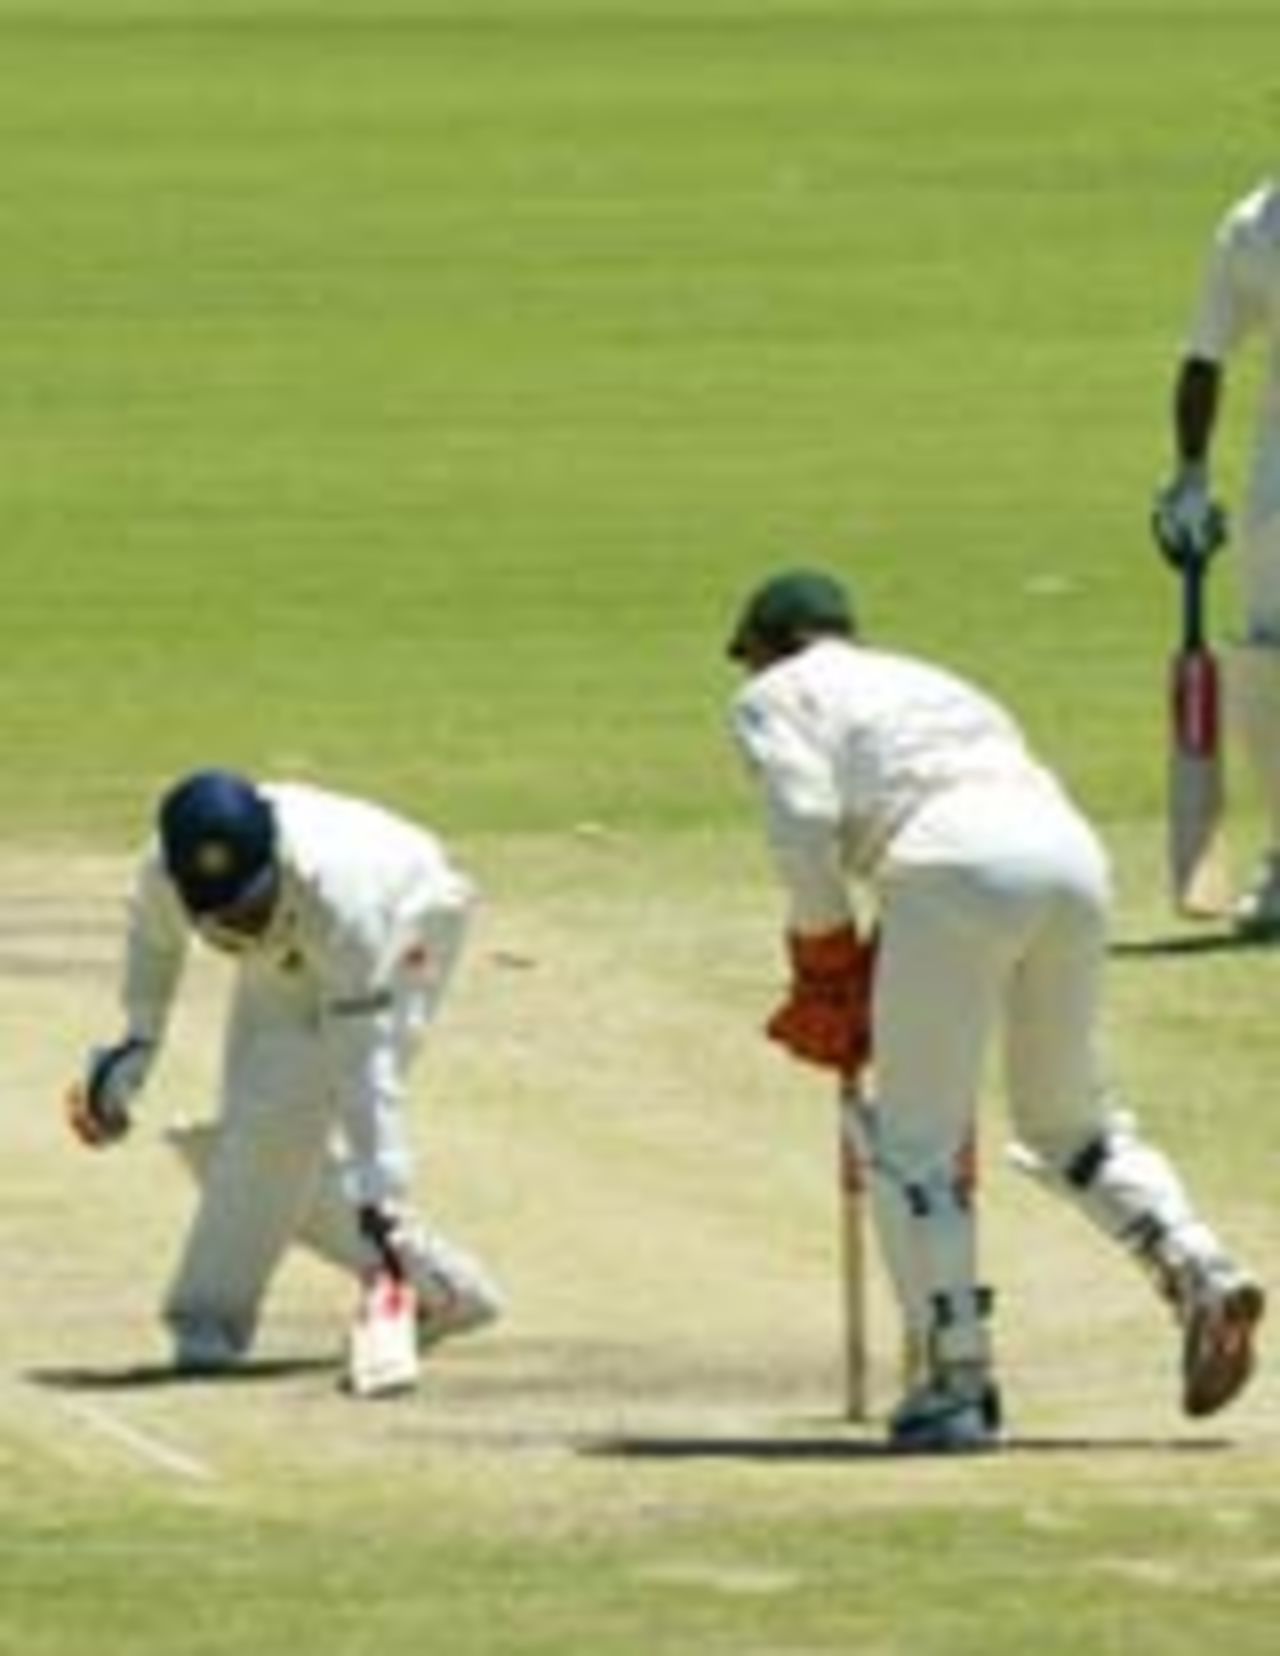 Sehwag is stumped, Australia v India, 2nd Test, Adelaide, 5th day, December 16, 2003